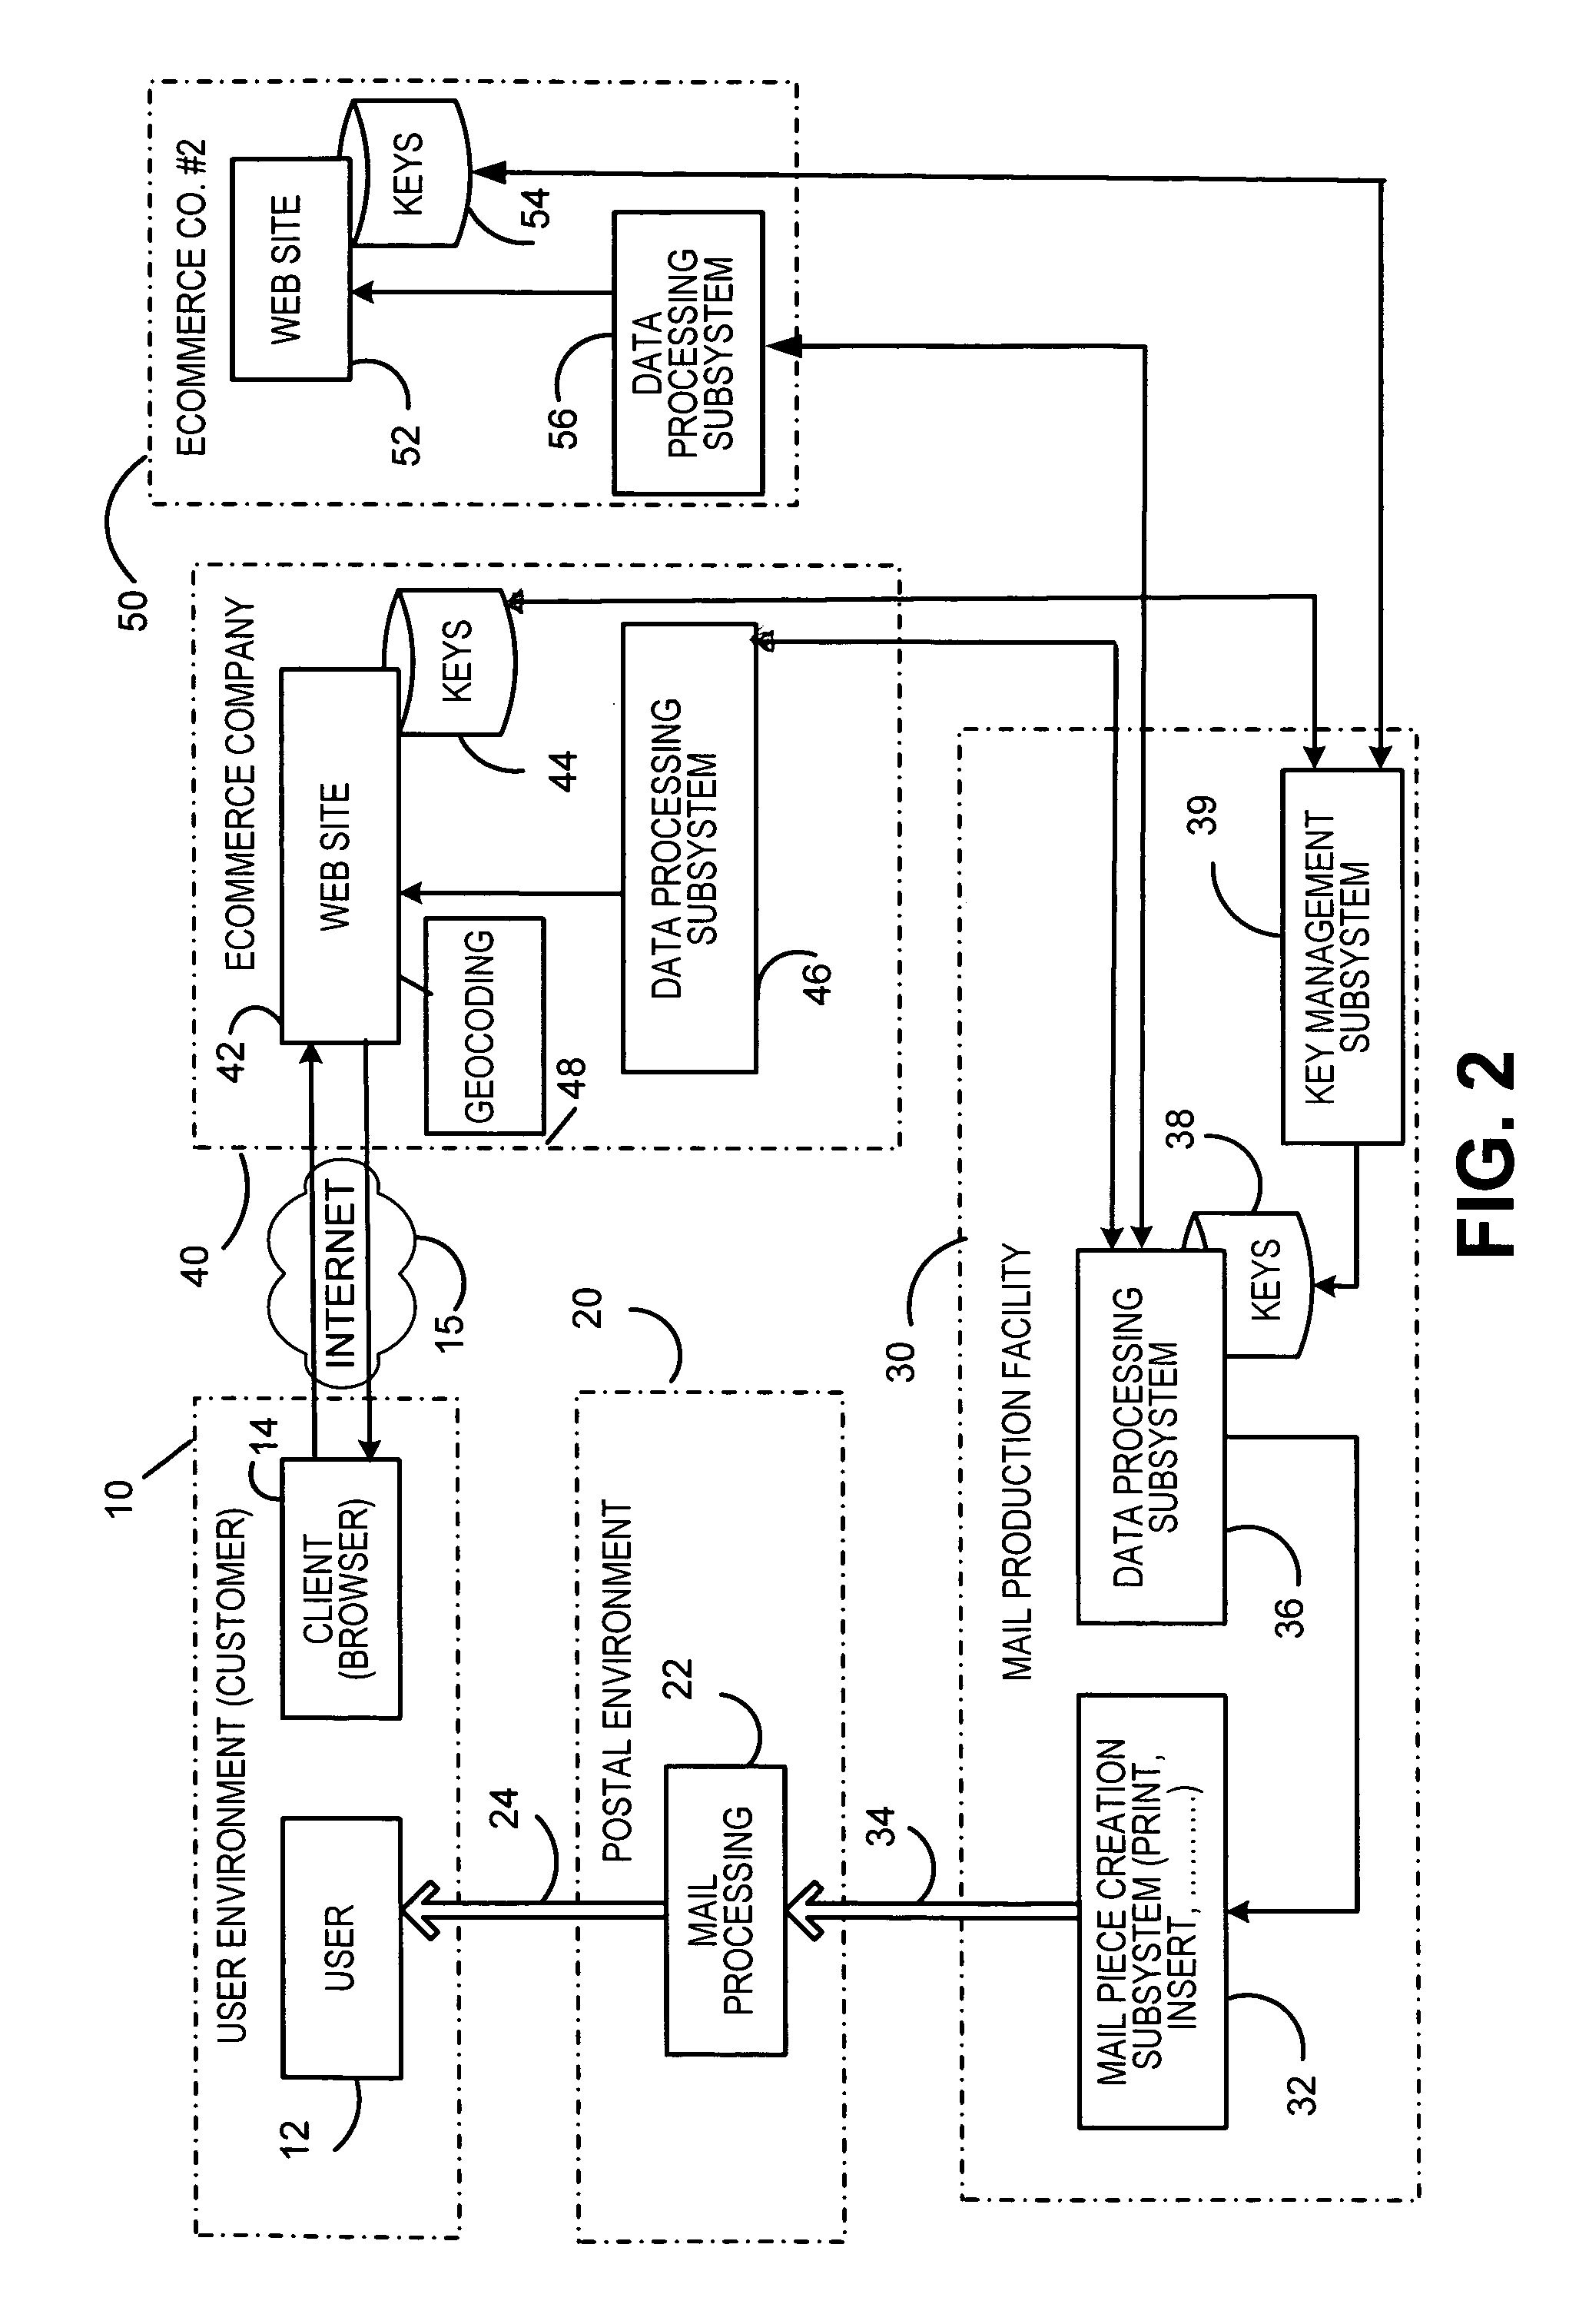 Enhanced network server authentication using a physical out-of-band channel